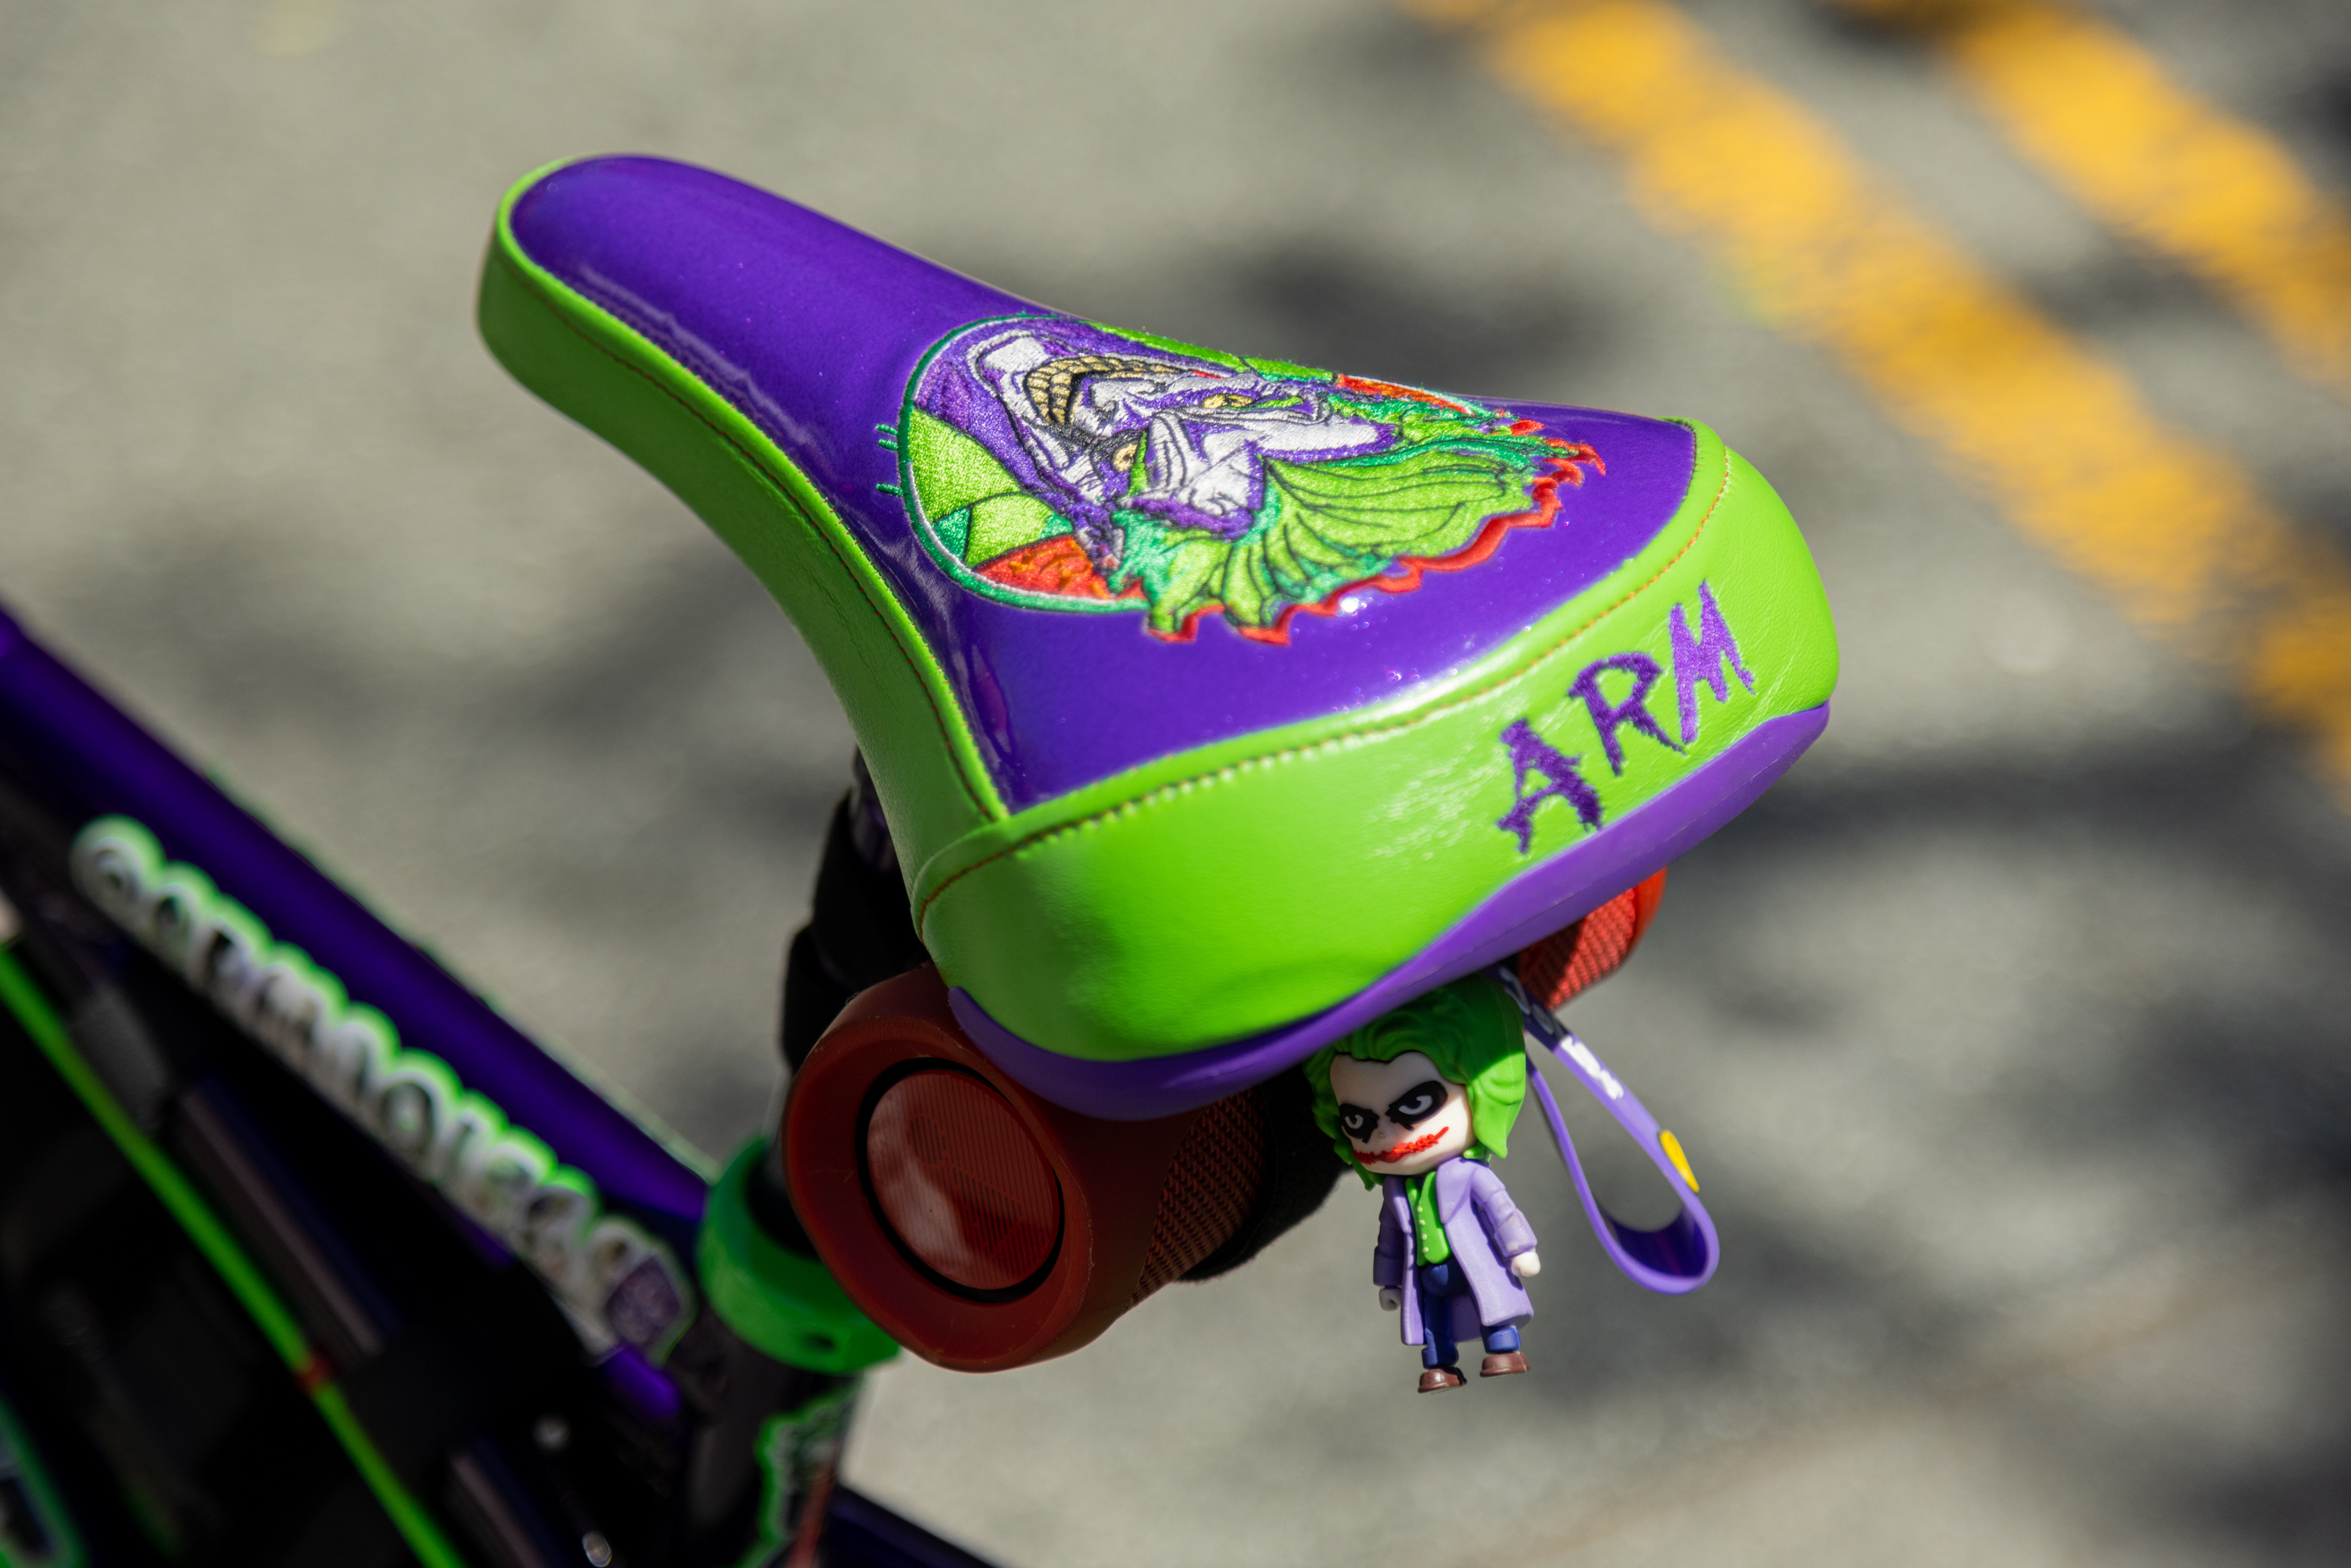 A vibrant purple and green bike saddle with an emblem and the word &quot;ARM&quot; on it, with a small Joker figure hanging below.